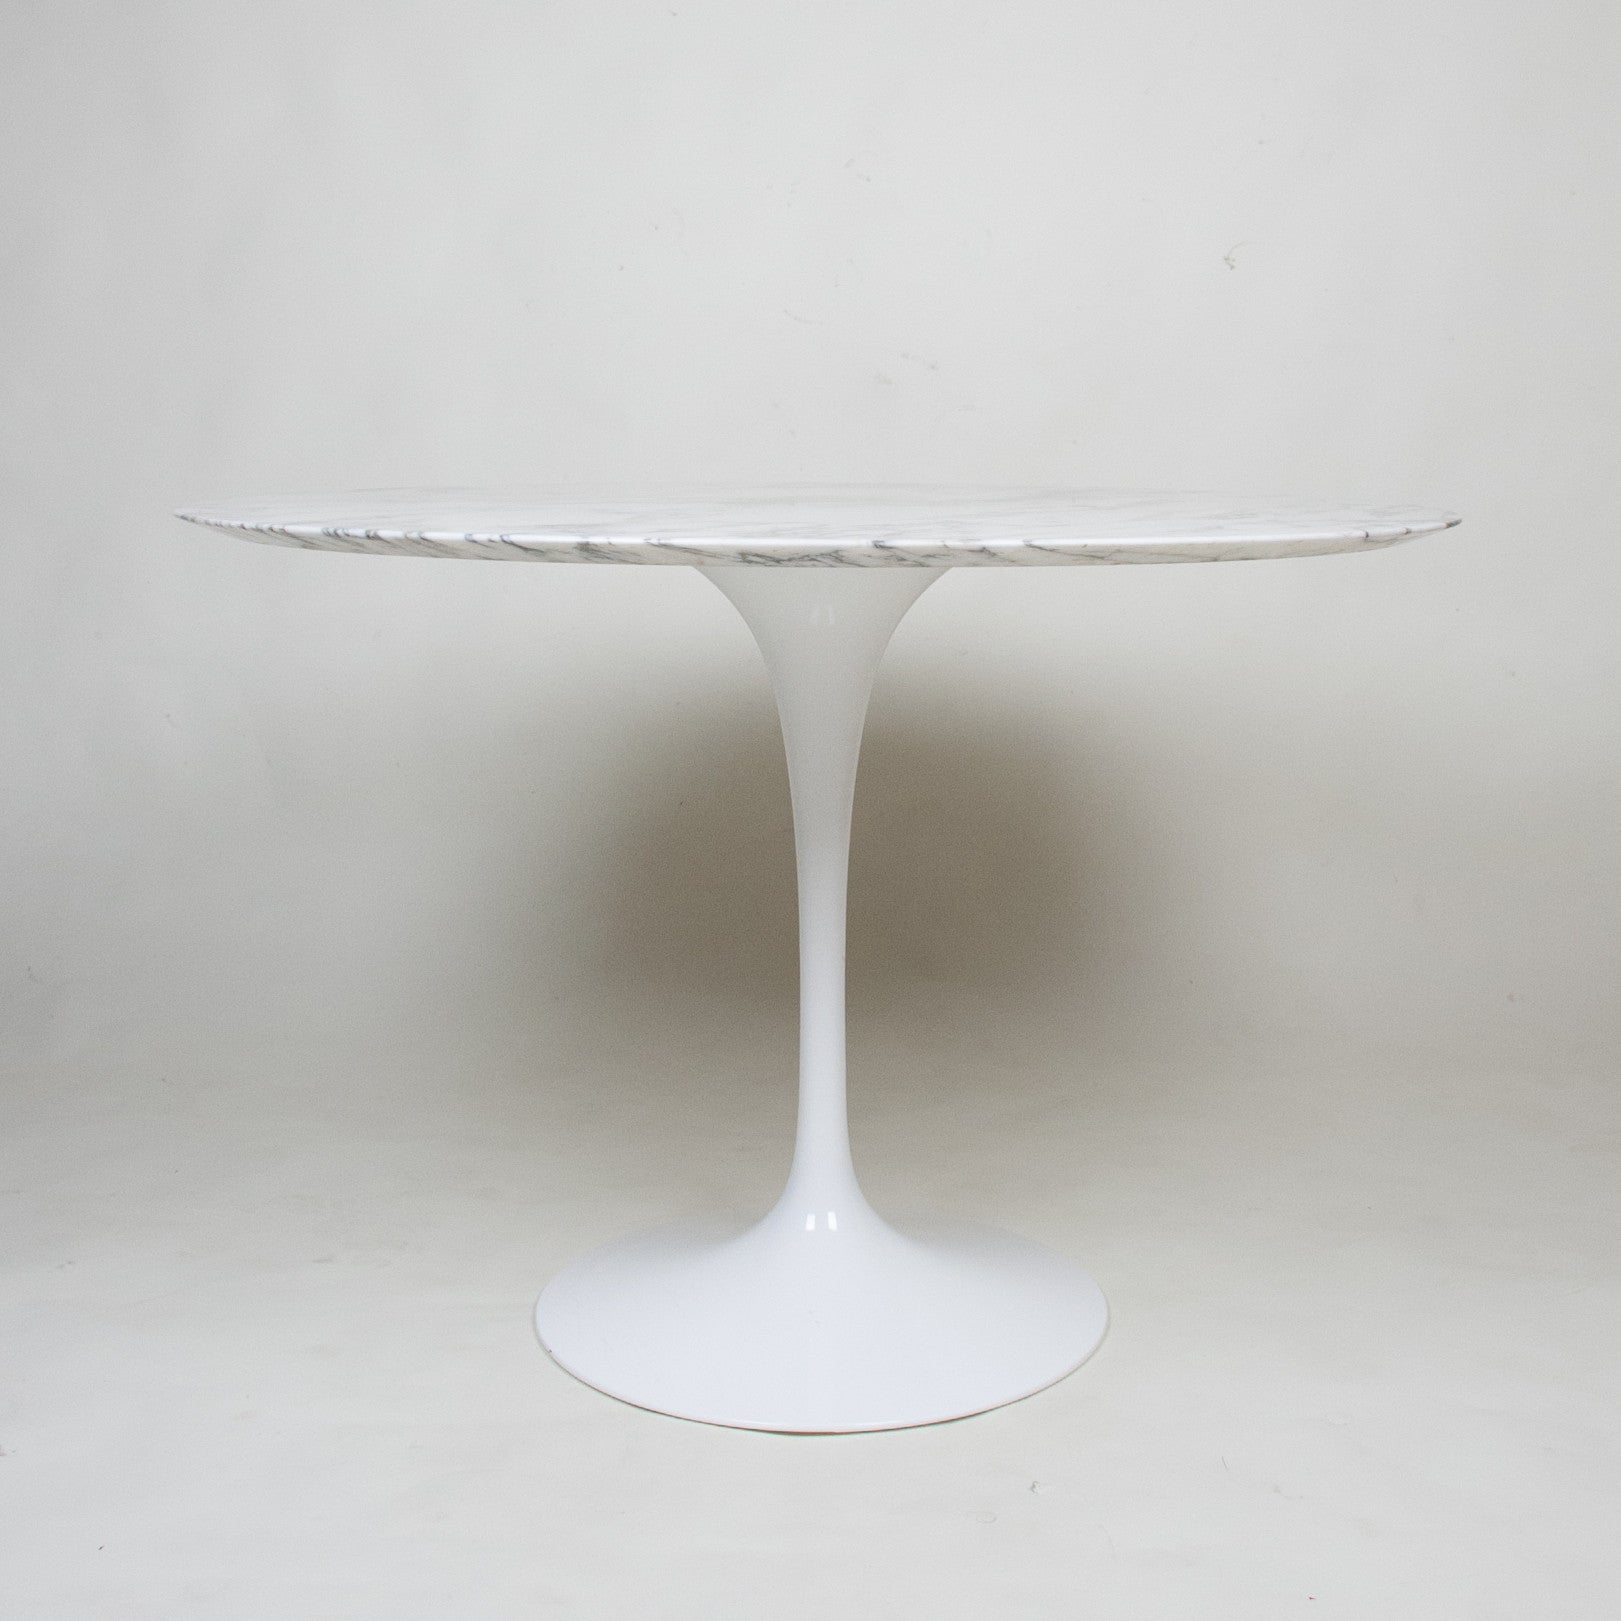 SOLD Eero Saarinen For Knoll 42 Inch Tulip Conference / Dining Table Marble Mint!